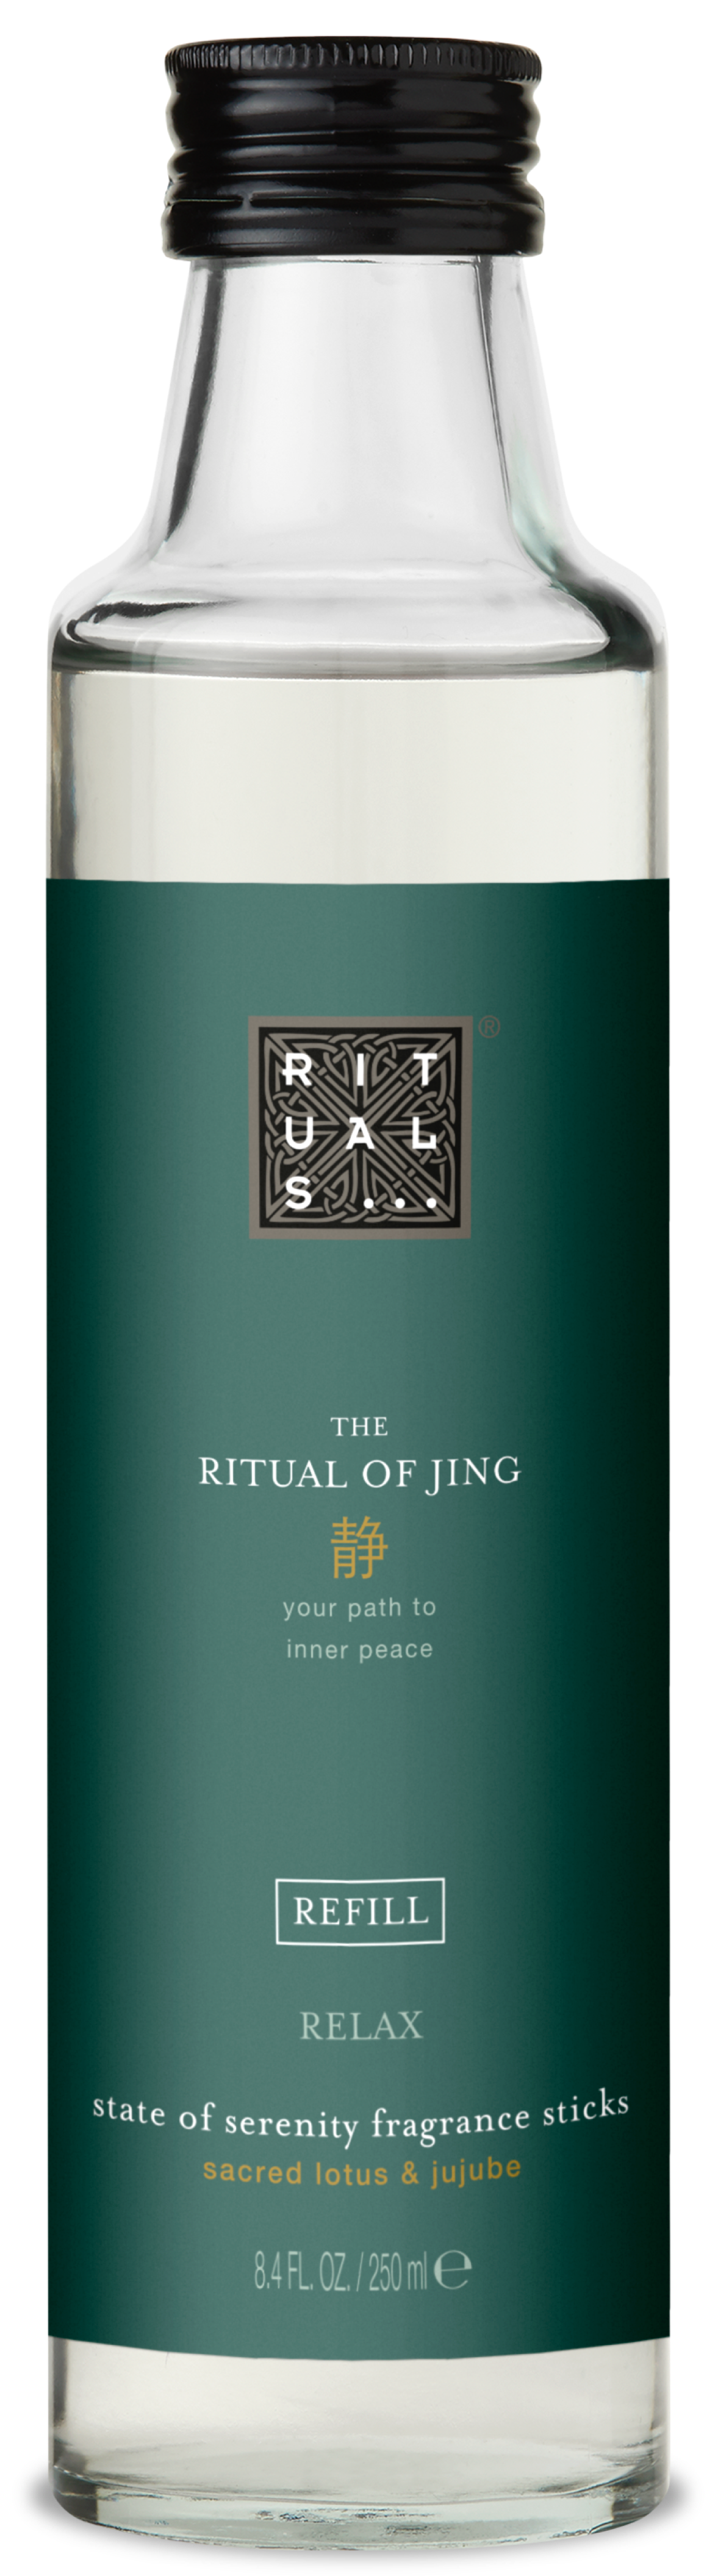 https://lyko.com/globalassets/product-images/rituals-the-ritual-of-jing-refill-fragrance-sticks-250ml-1808-705-0250_1.png?ref=7915032155